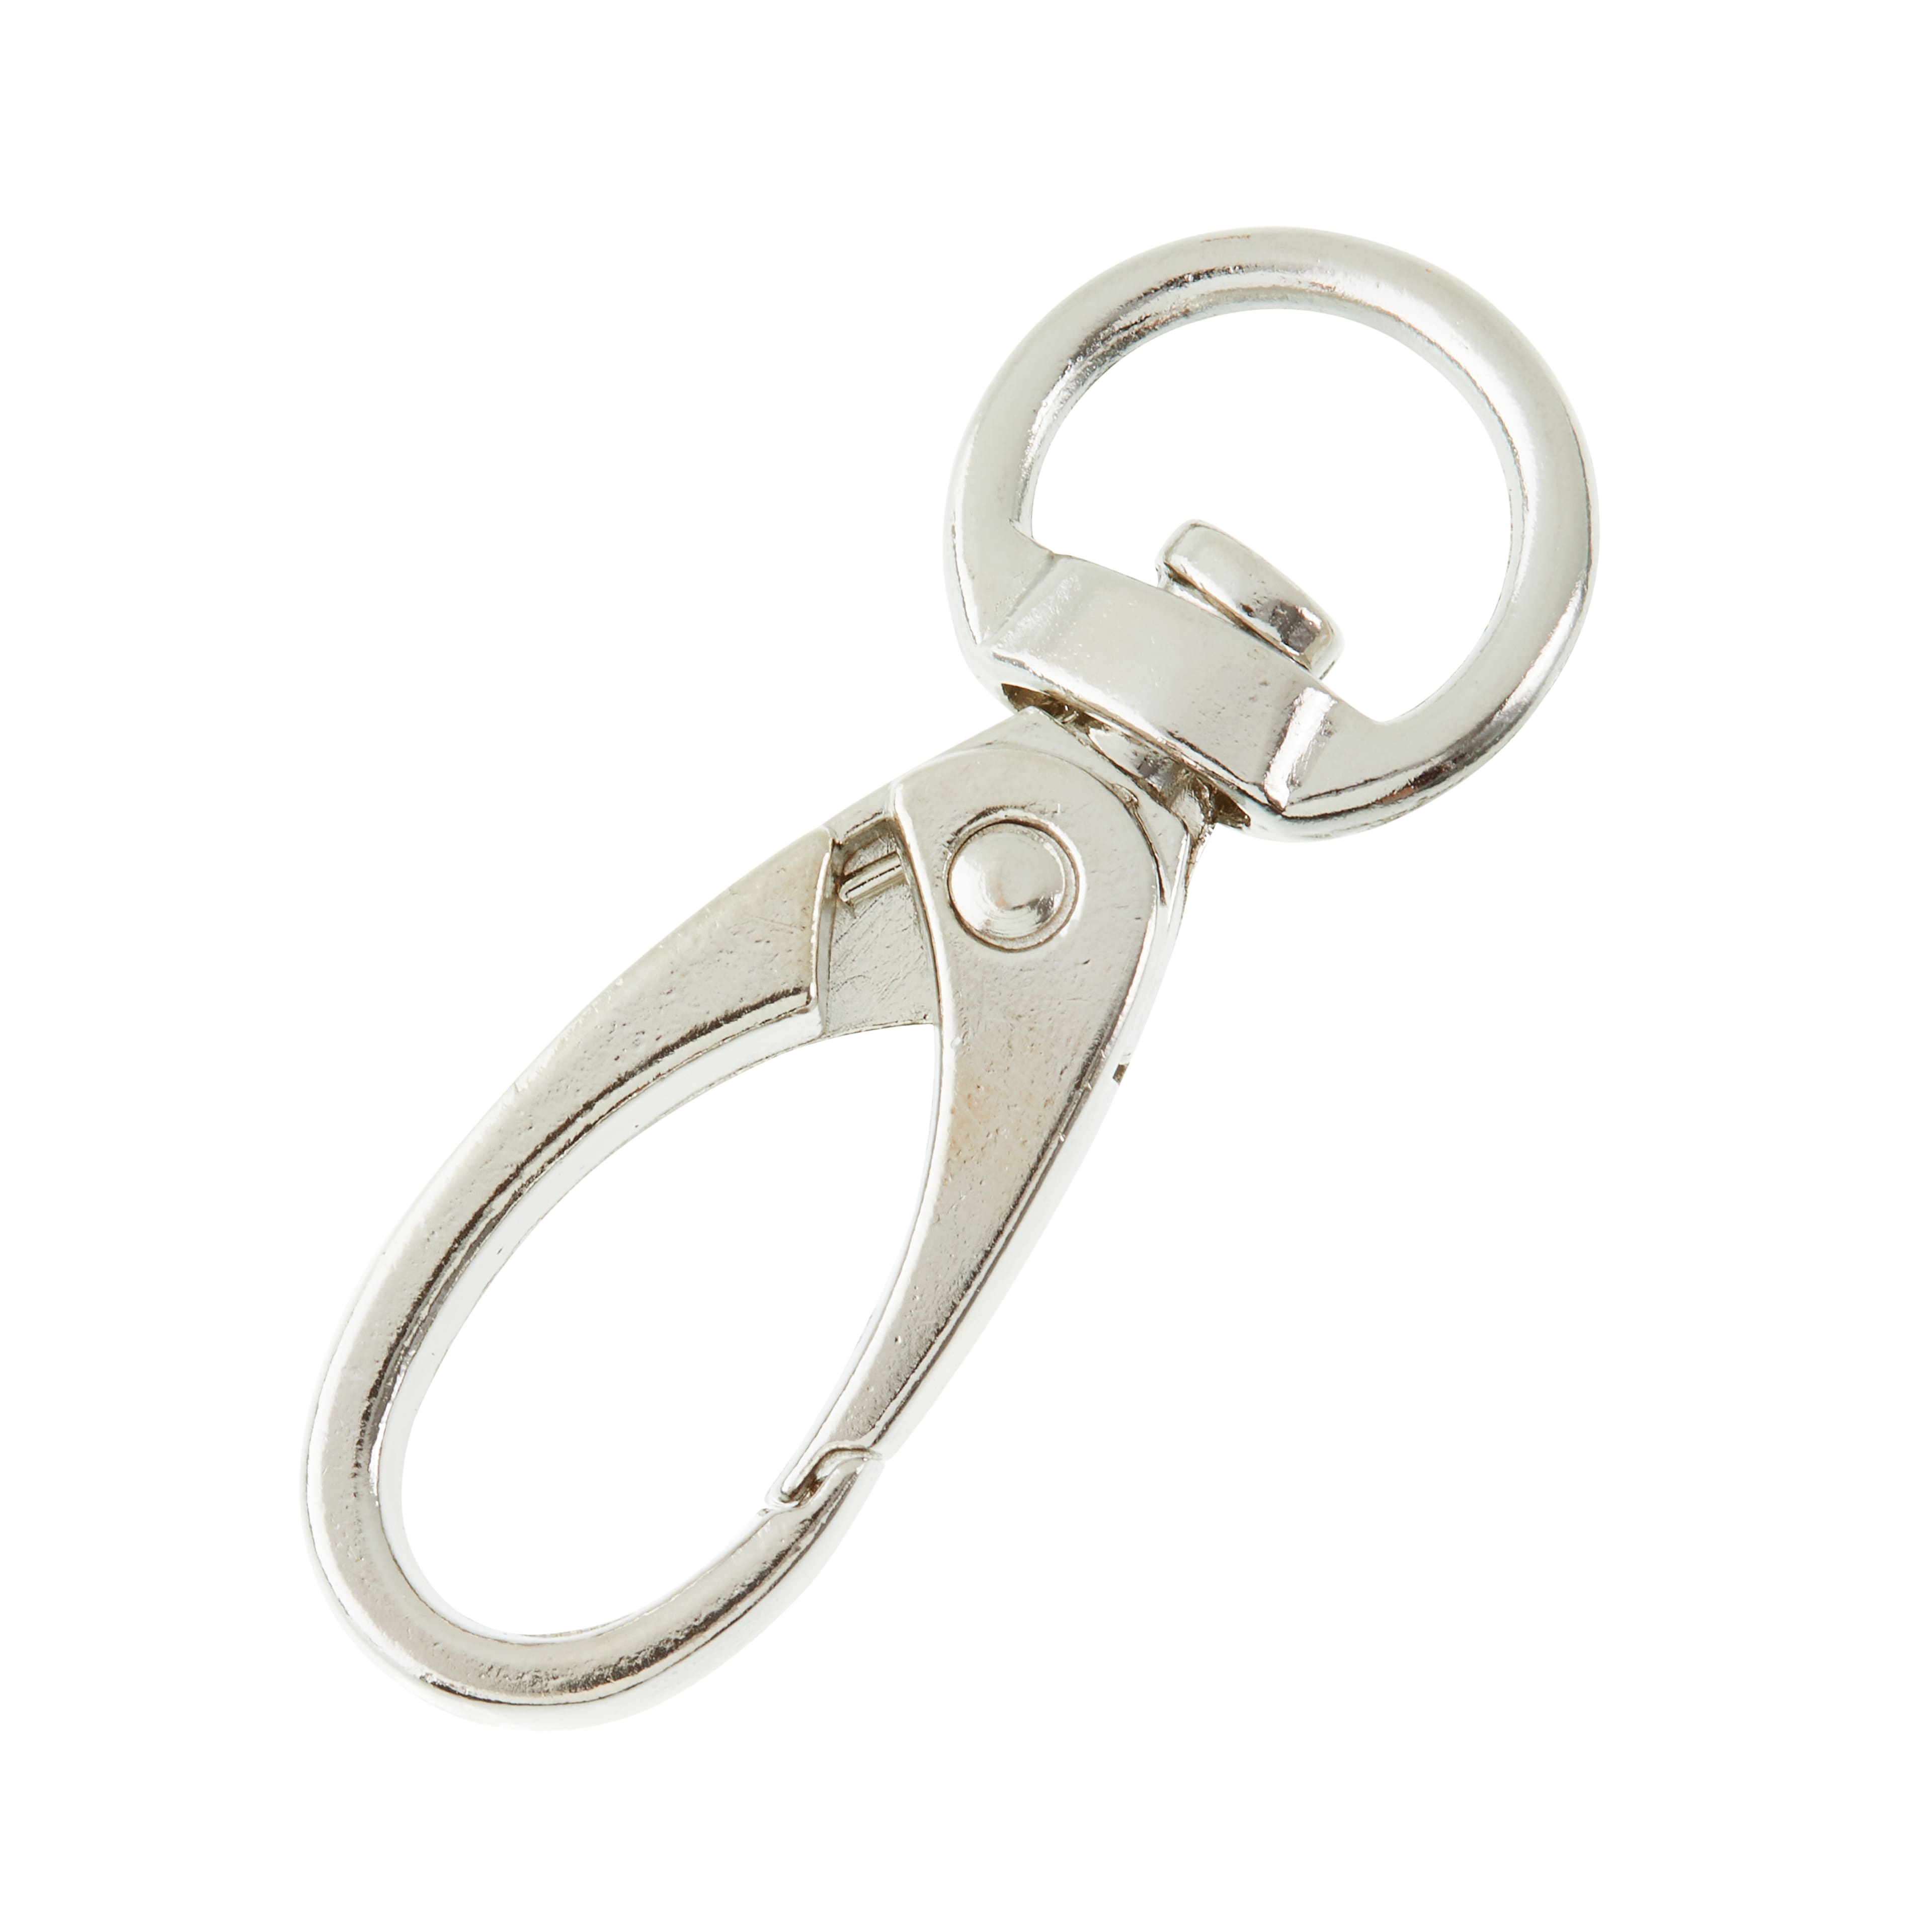 Shop for the Silver Swivel Hook by Loops & Threads® at Michaels